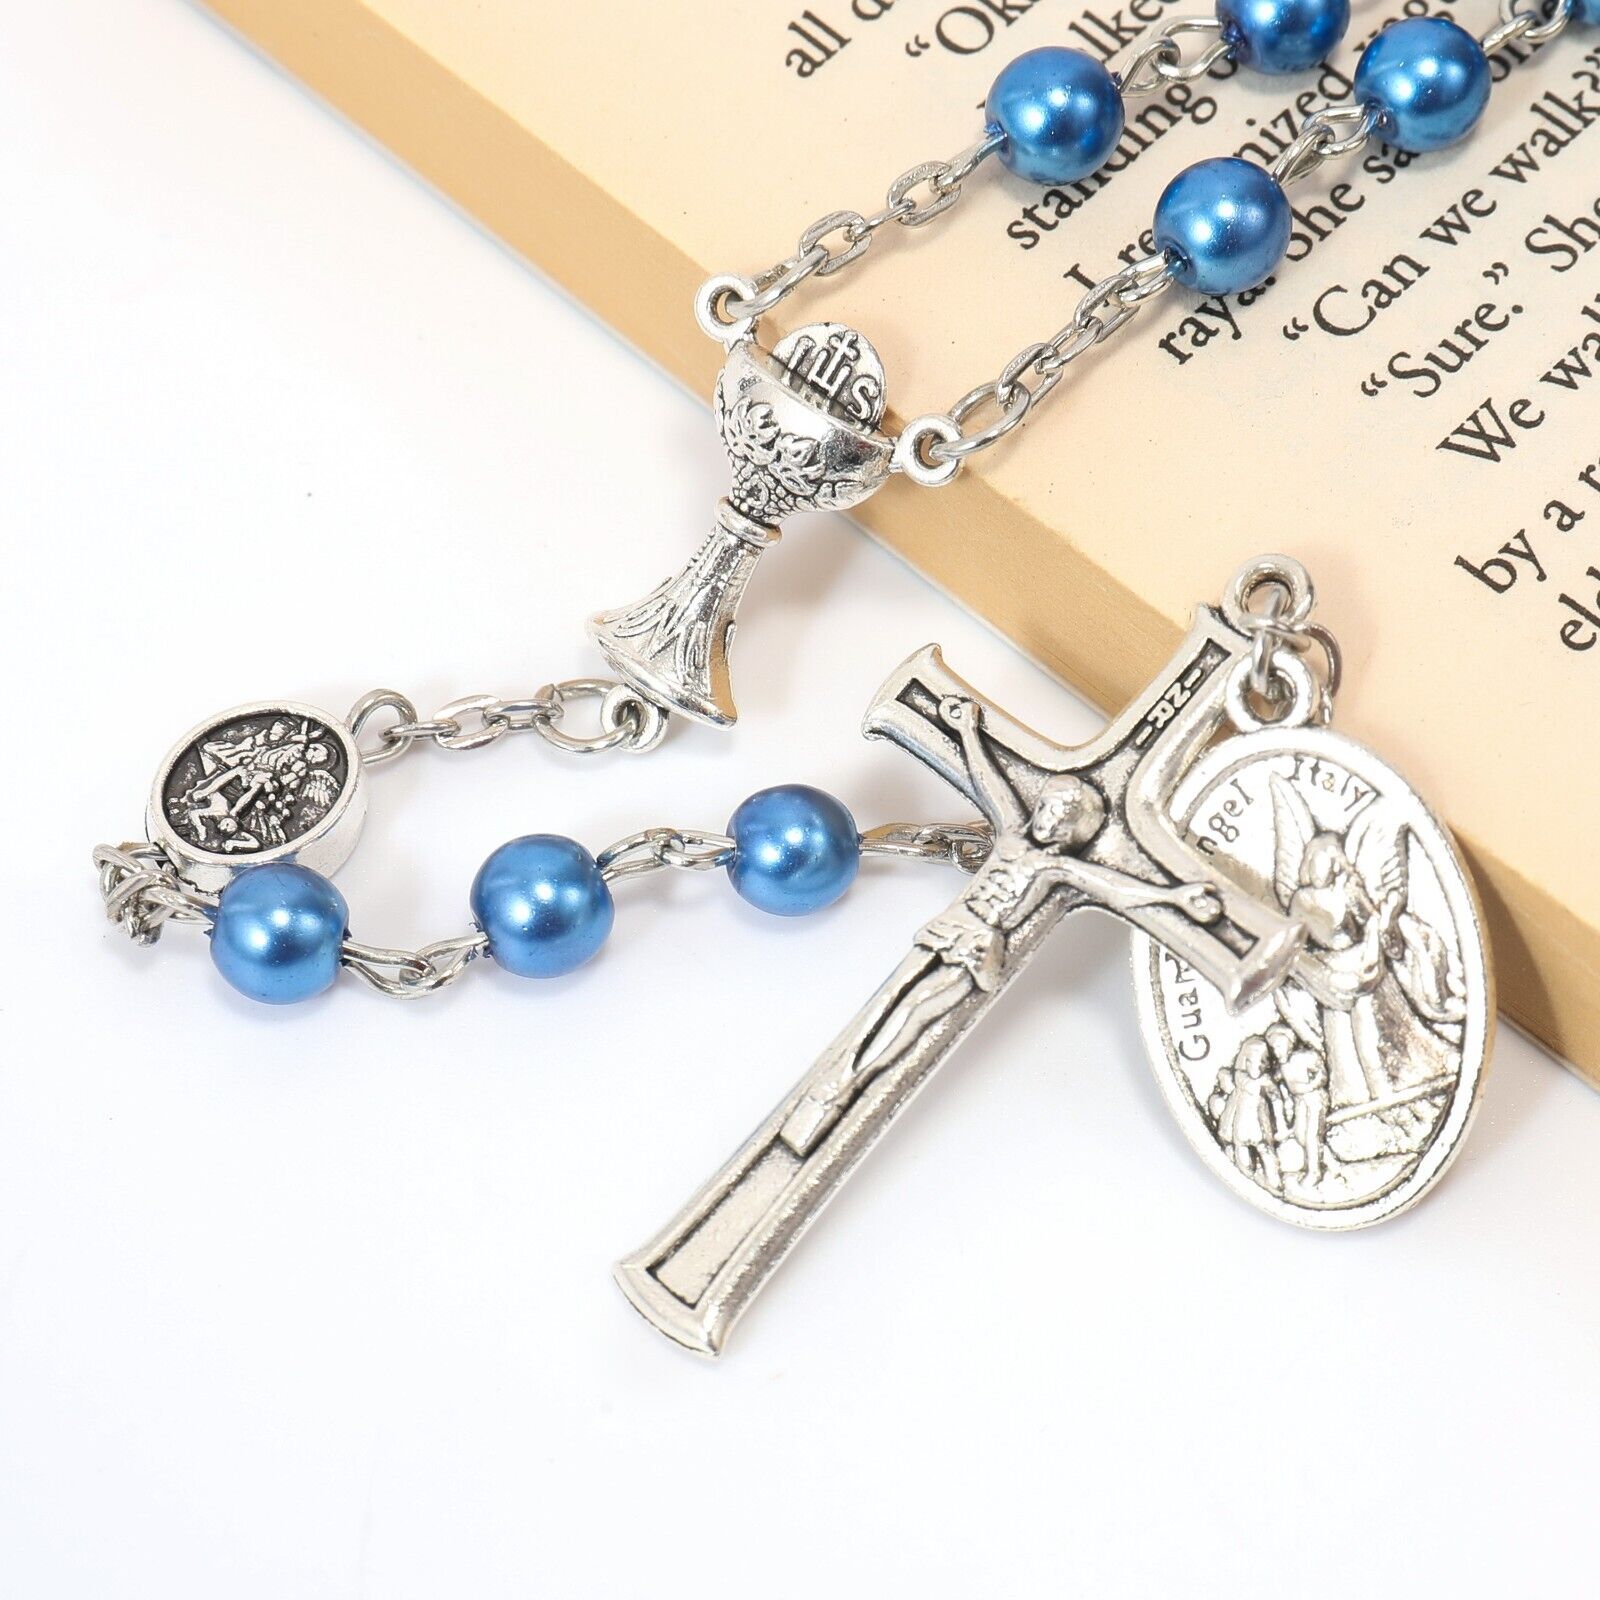 Blue Pearl Beads Communion Rosary 8mm Guardian Our Father Beads St.Micahel Medal Nazareth Store